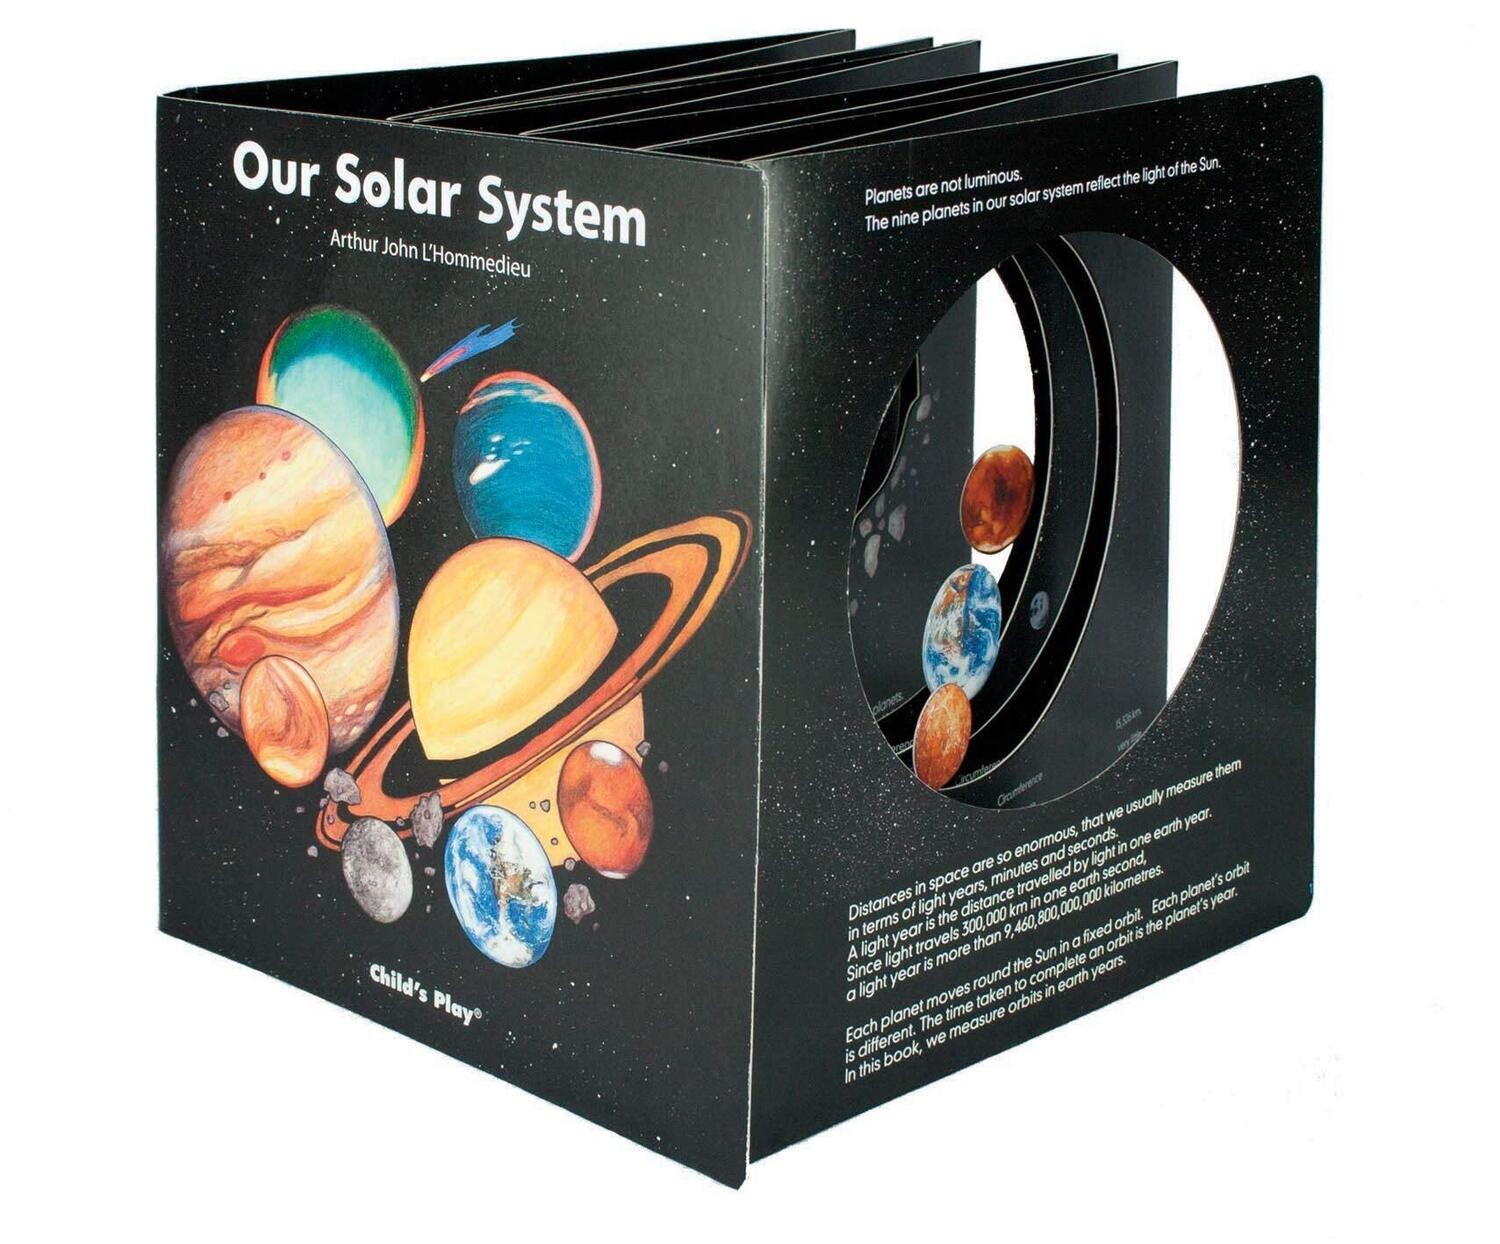 Our solar system book